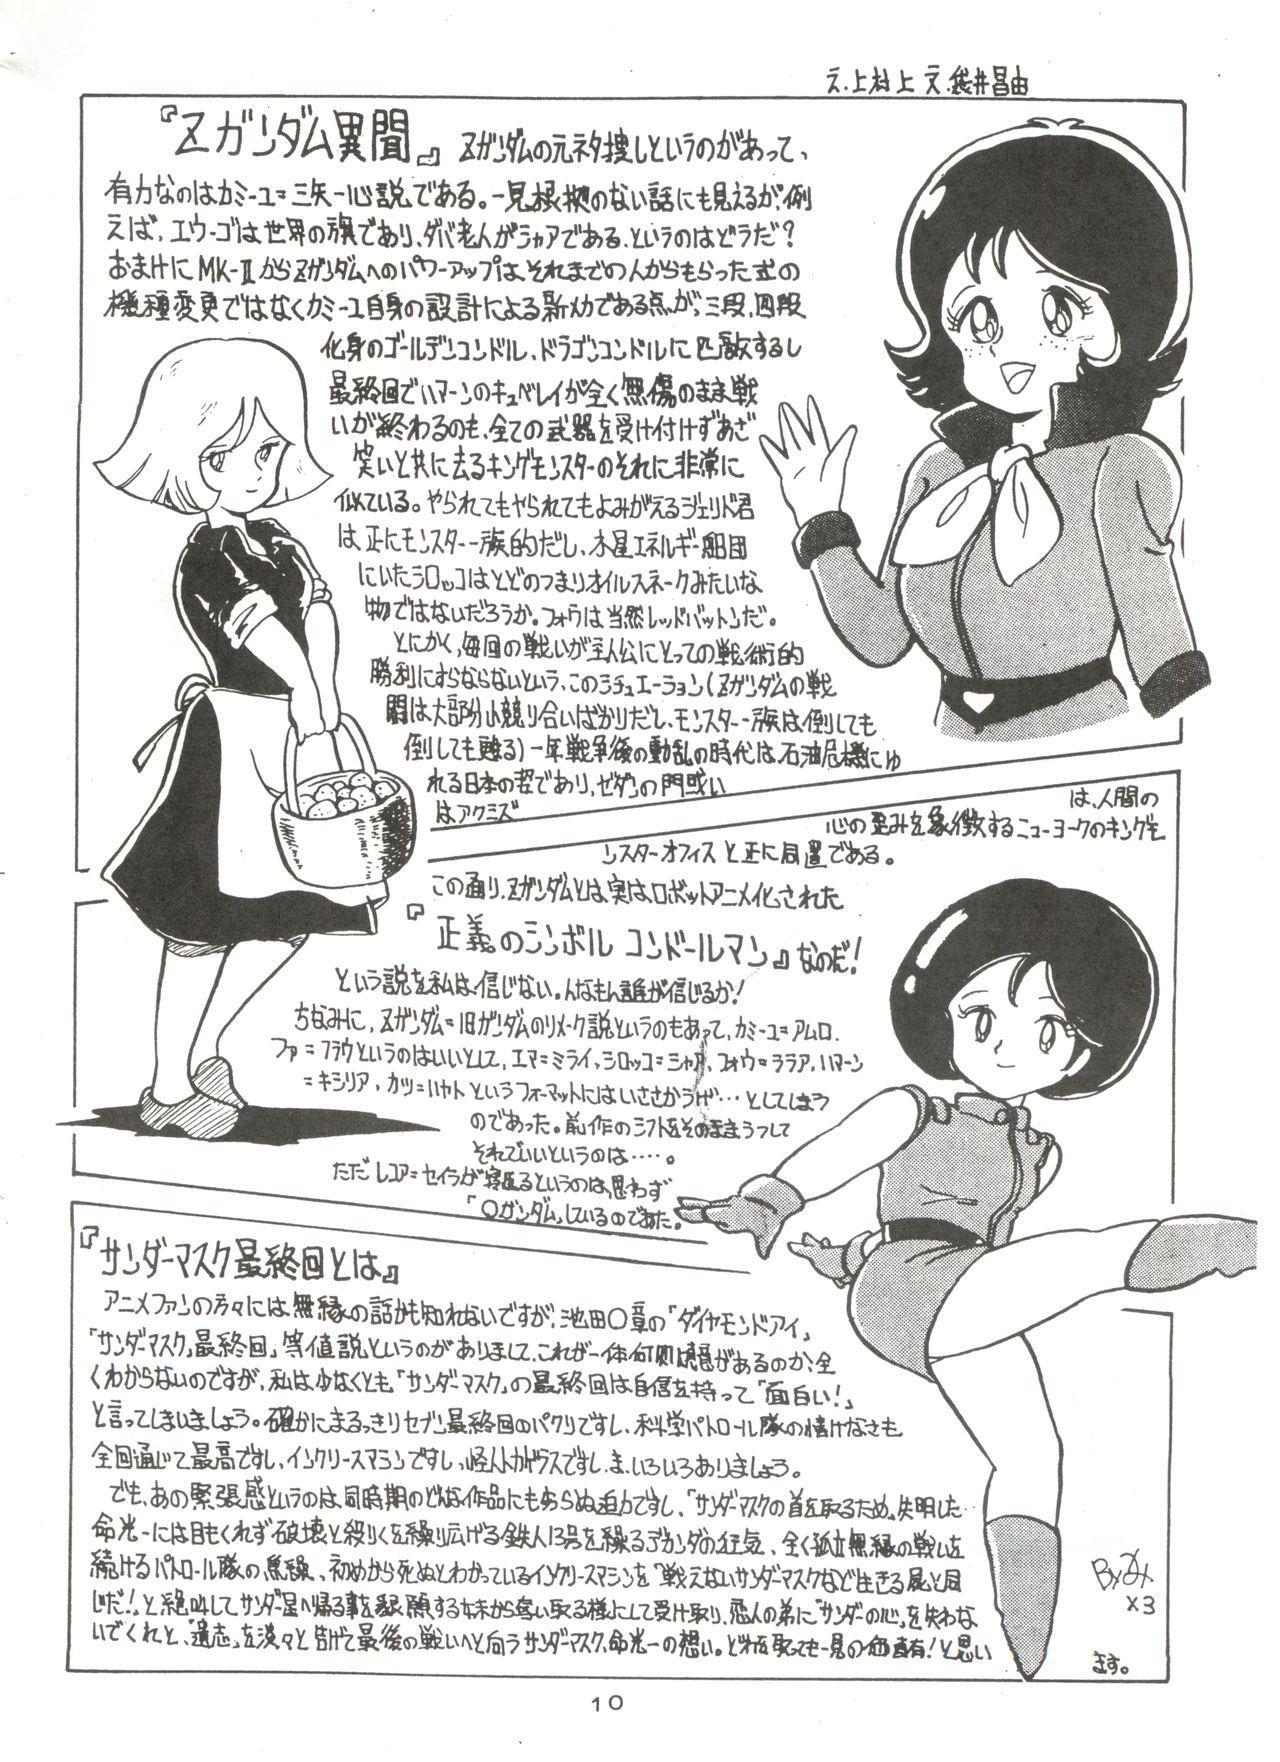 Crazy Look Out 3R - Maison ikkoku Magical emi Gundam zz The super dimension fortress macross Sucking Dick - Page 10